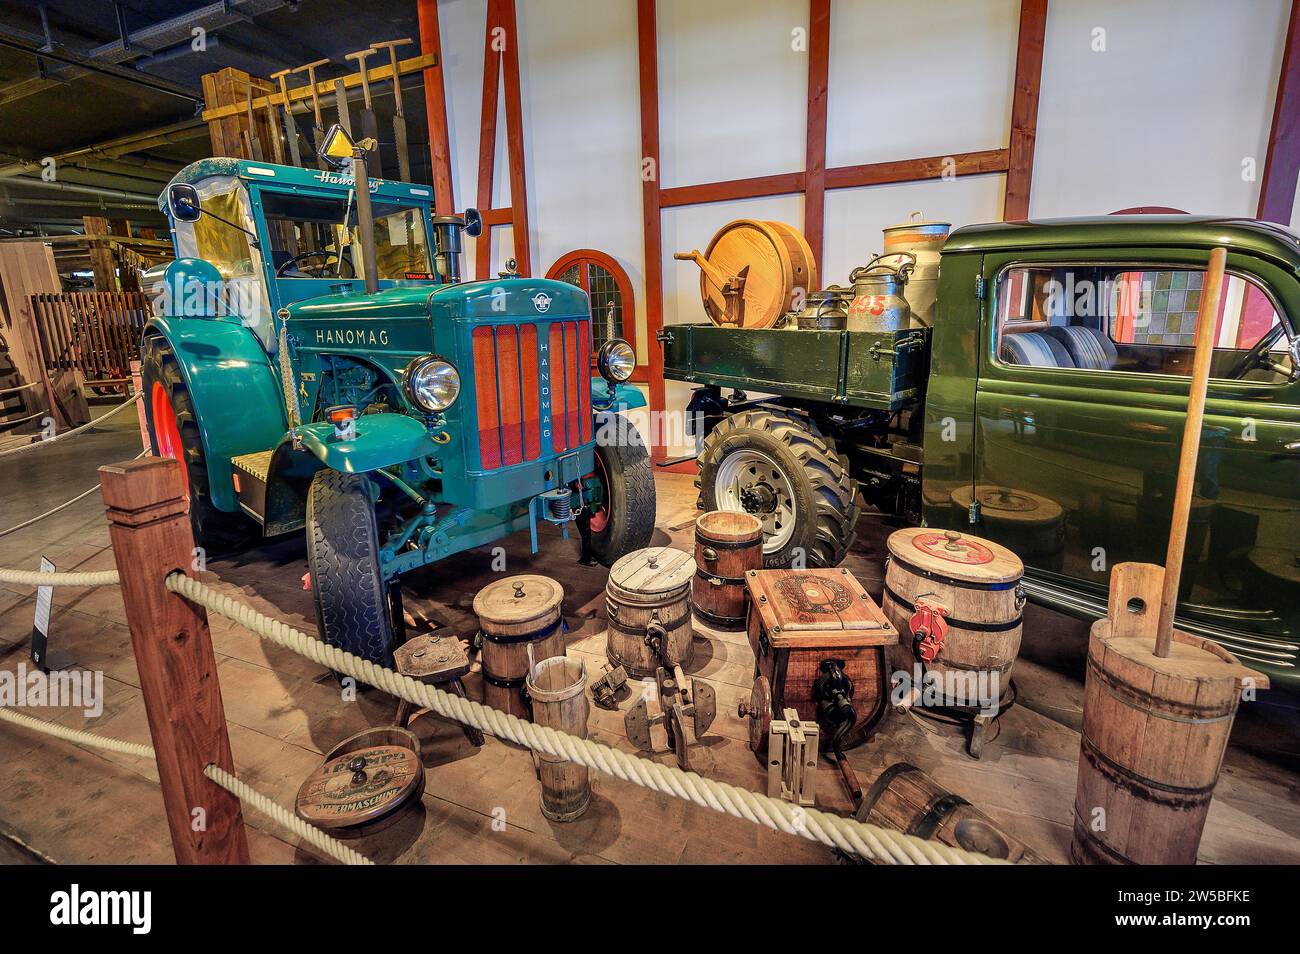 Hanomag R 40 tractor 1942-1951 and butter churns, Car and Tractor Museum Lake Constance, Gebhardsweiler, municipality of Uhldingen-Muehlhofen in the Stock Photo